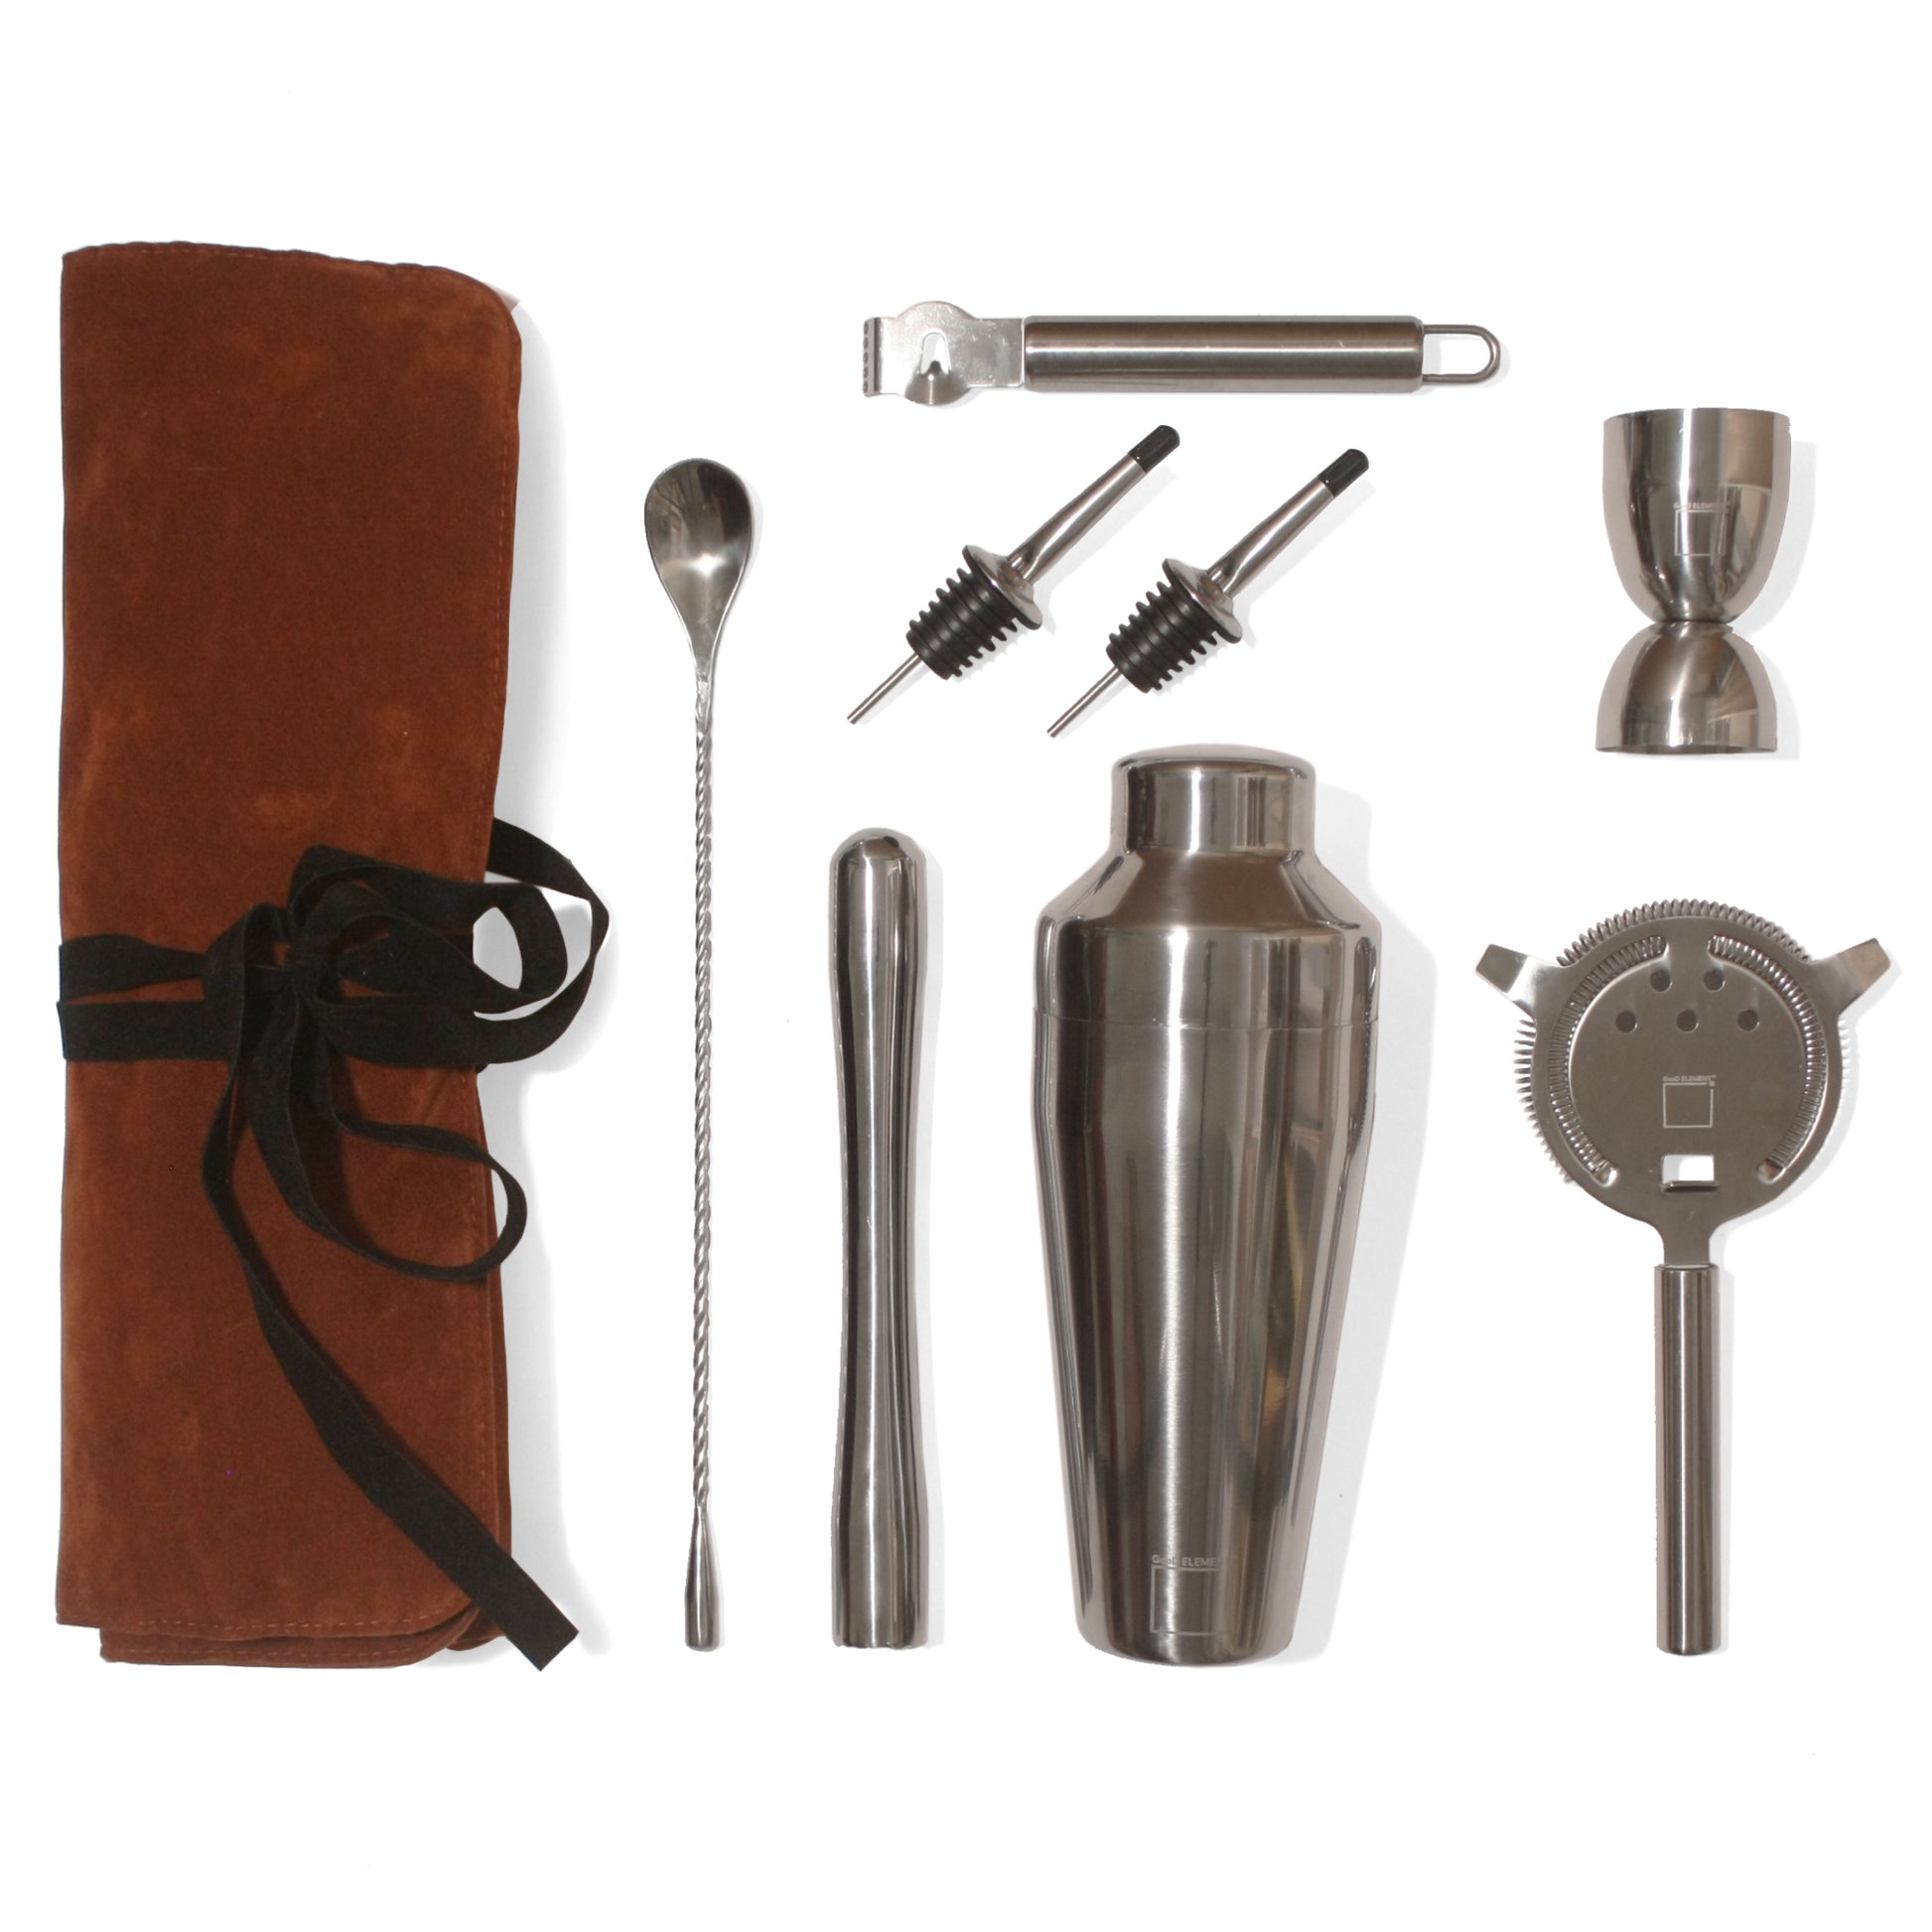 8 piece cocktail shaker set with wrapped case – GooD ELEMENT